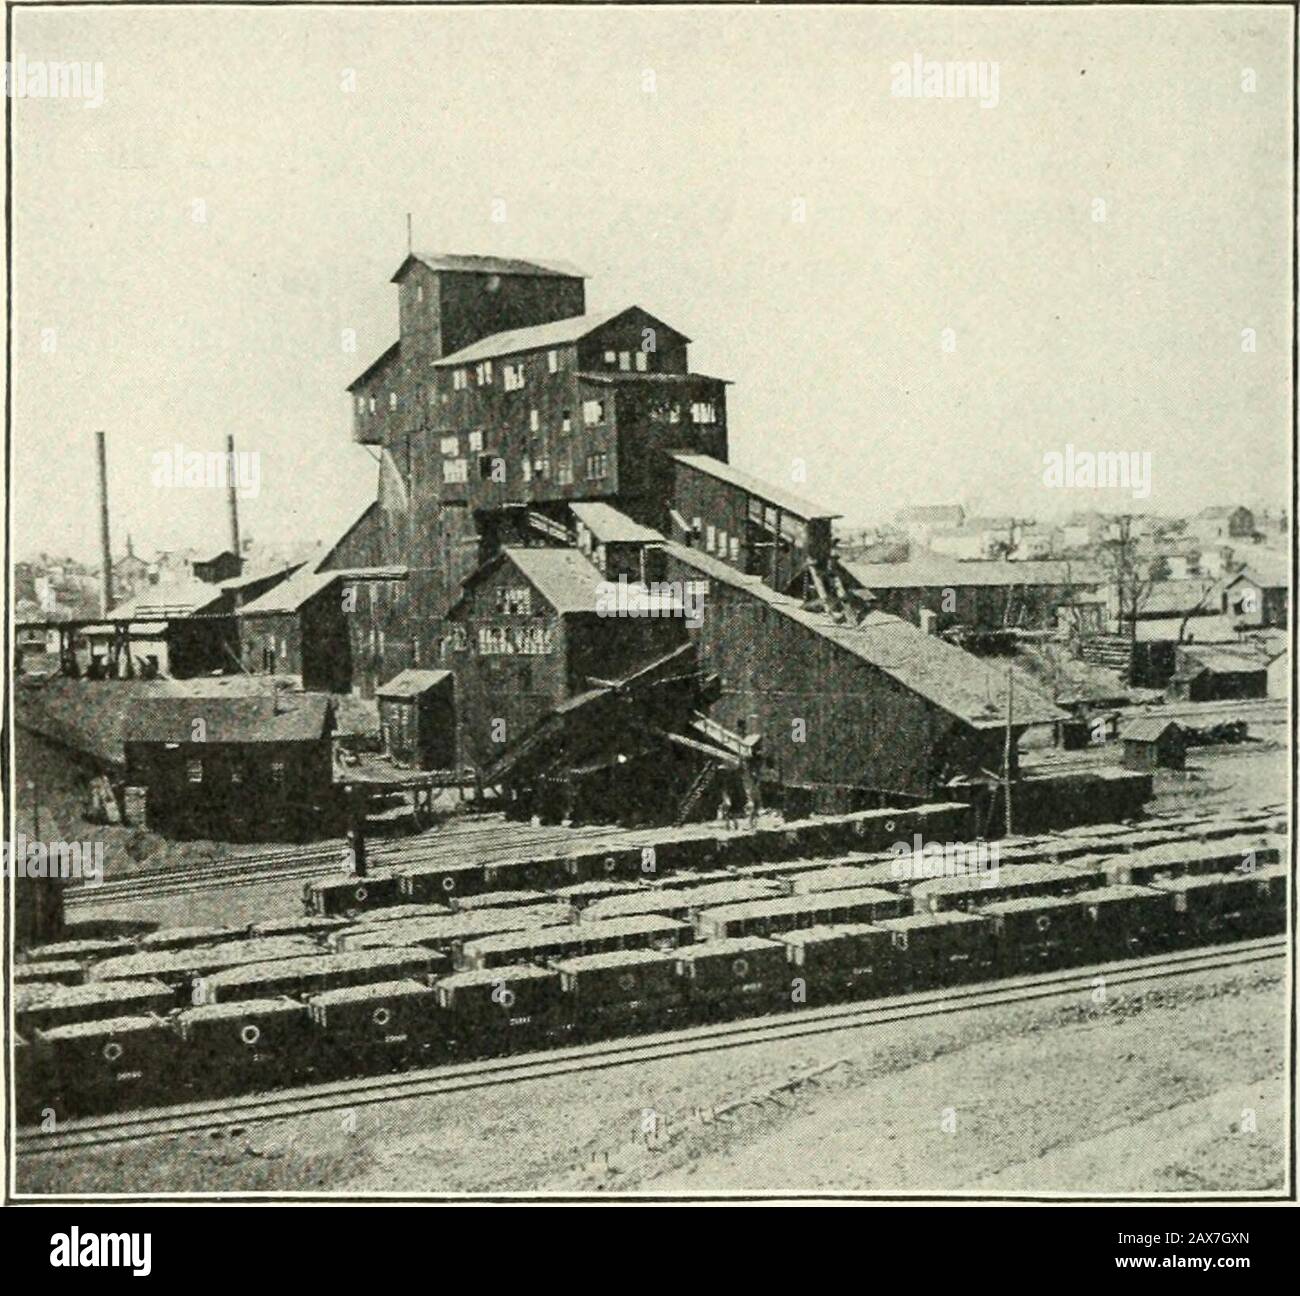 Pennsylvania, colonial and federal : a history, 1608-1903 . rn extremity of the companys works, wherefourteen seams were developed in 1830, with an aggregate of 240feet of coal. In 1837 the construction of the Susquehanna and LehighRailroad from White Haven to the Wyoming valley was begun,and was completed in 1845. The first shipment of coal, 5,886tons, over the road was made in 1846. The Beaver MeadowRailroad, o[)ening an outlet from the Beaver Aleadow coal l)asin,and the Hazleton Railrtjad to the basin of the same name, were inoperation in 1840. The Buck Mountain Companys road wasnearly fini Stock Photo